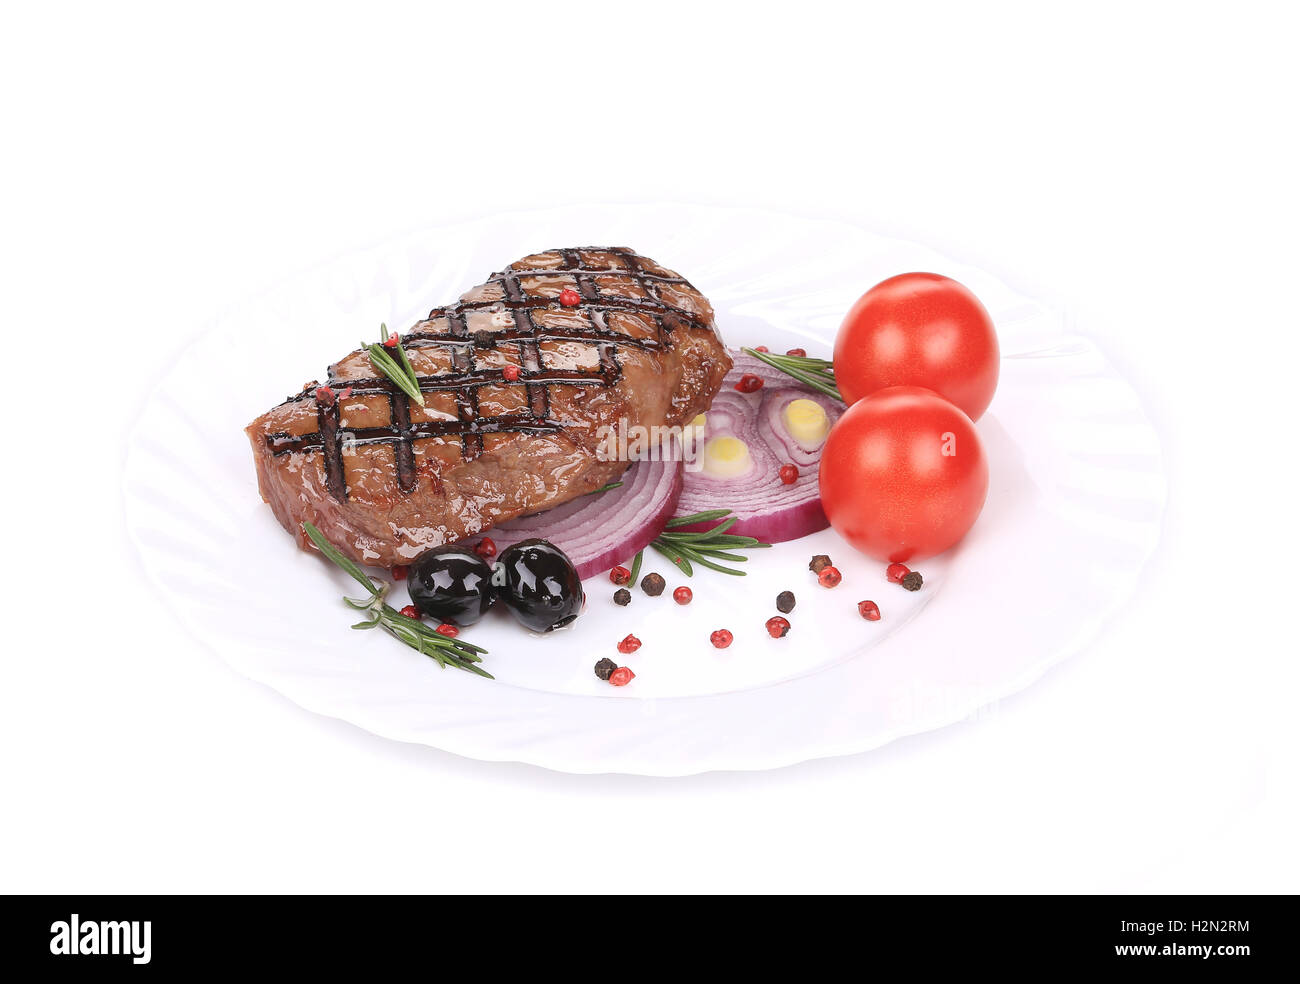 Big juicy grilled steak with greens. Stock Photo